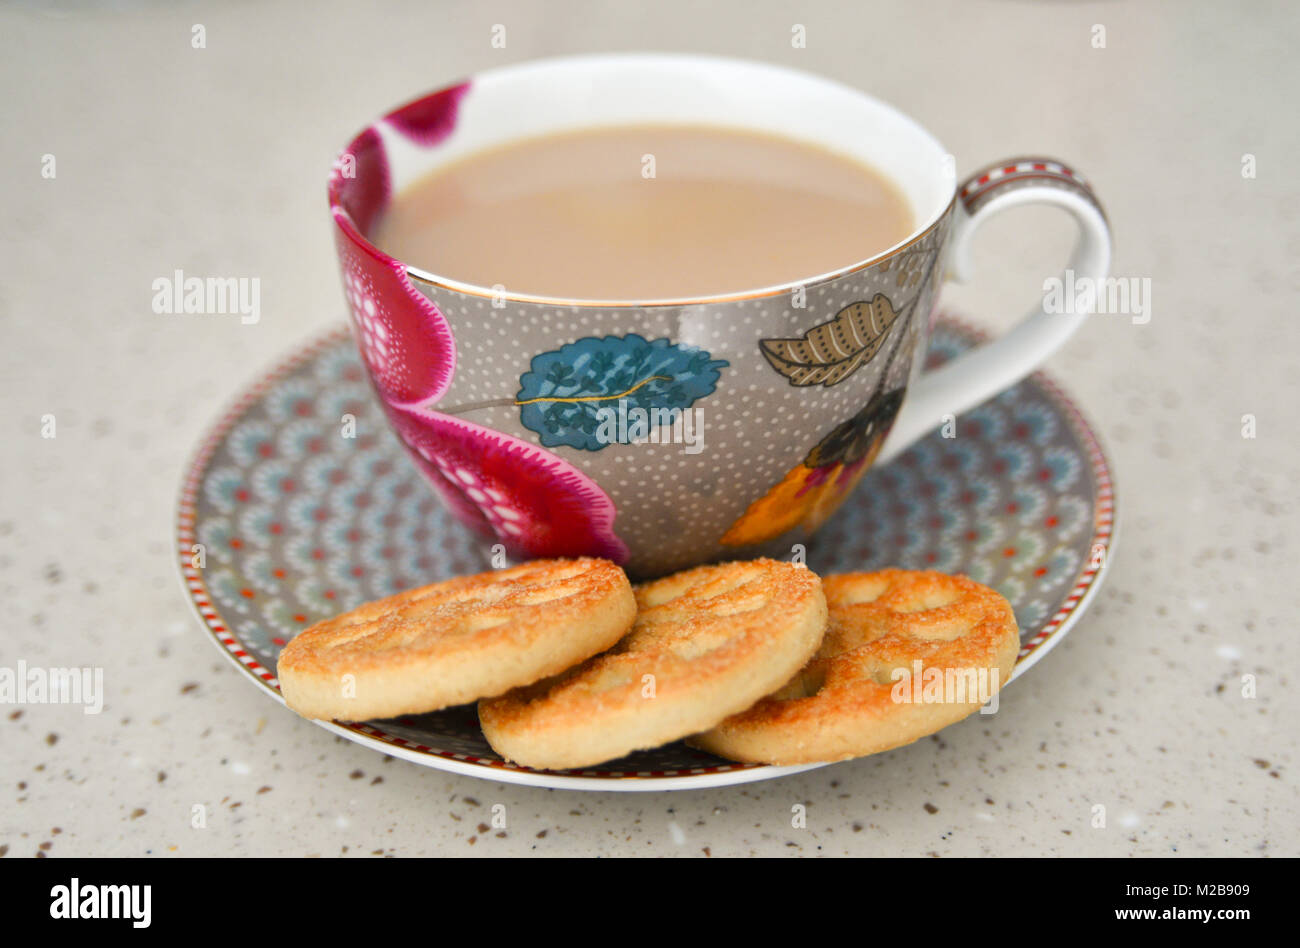 Cup of tea with milk, in a floral patterned cup and saucer with three round biscuits on a beige surface Stock Photo